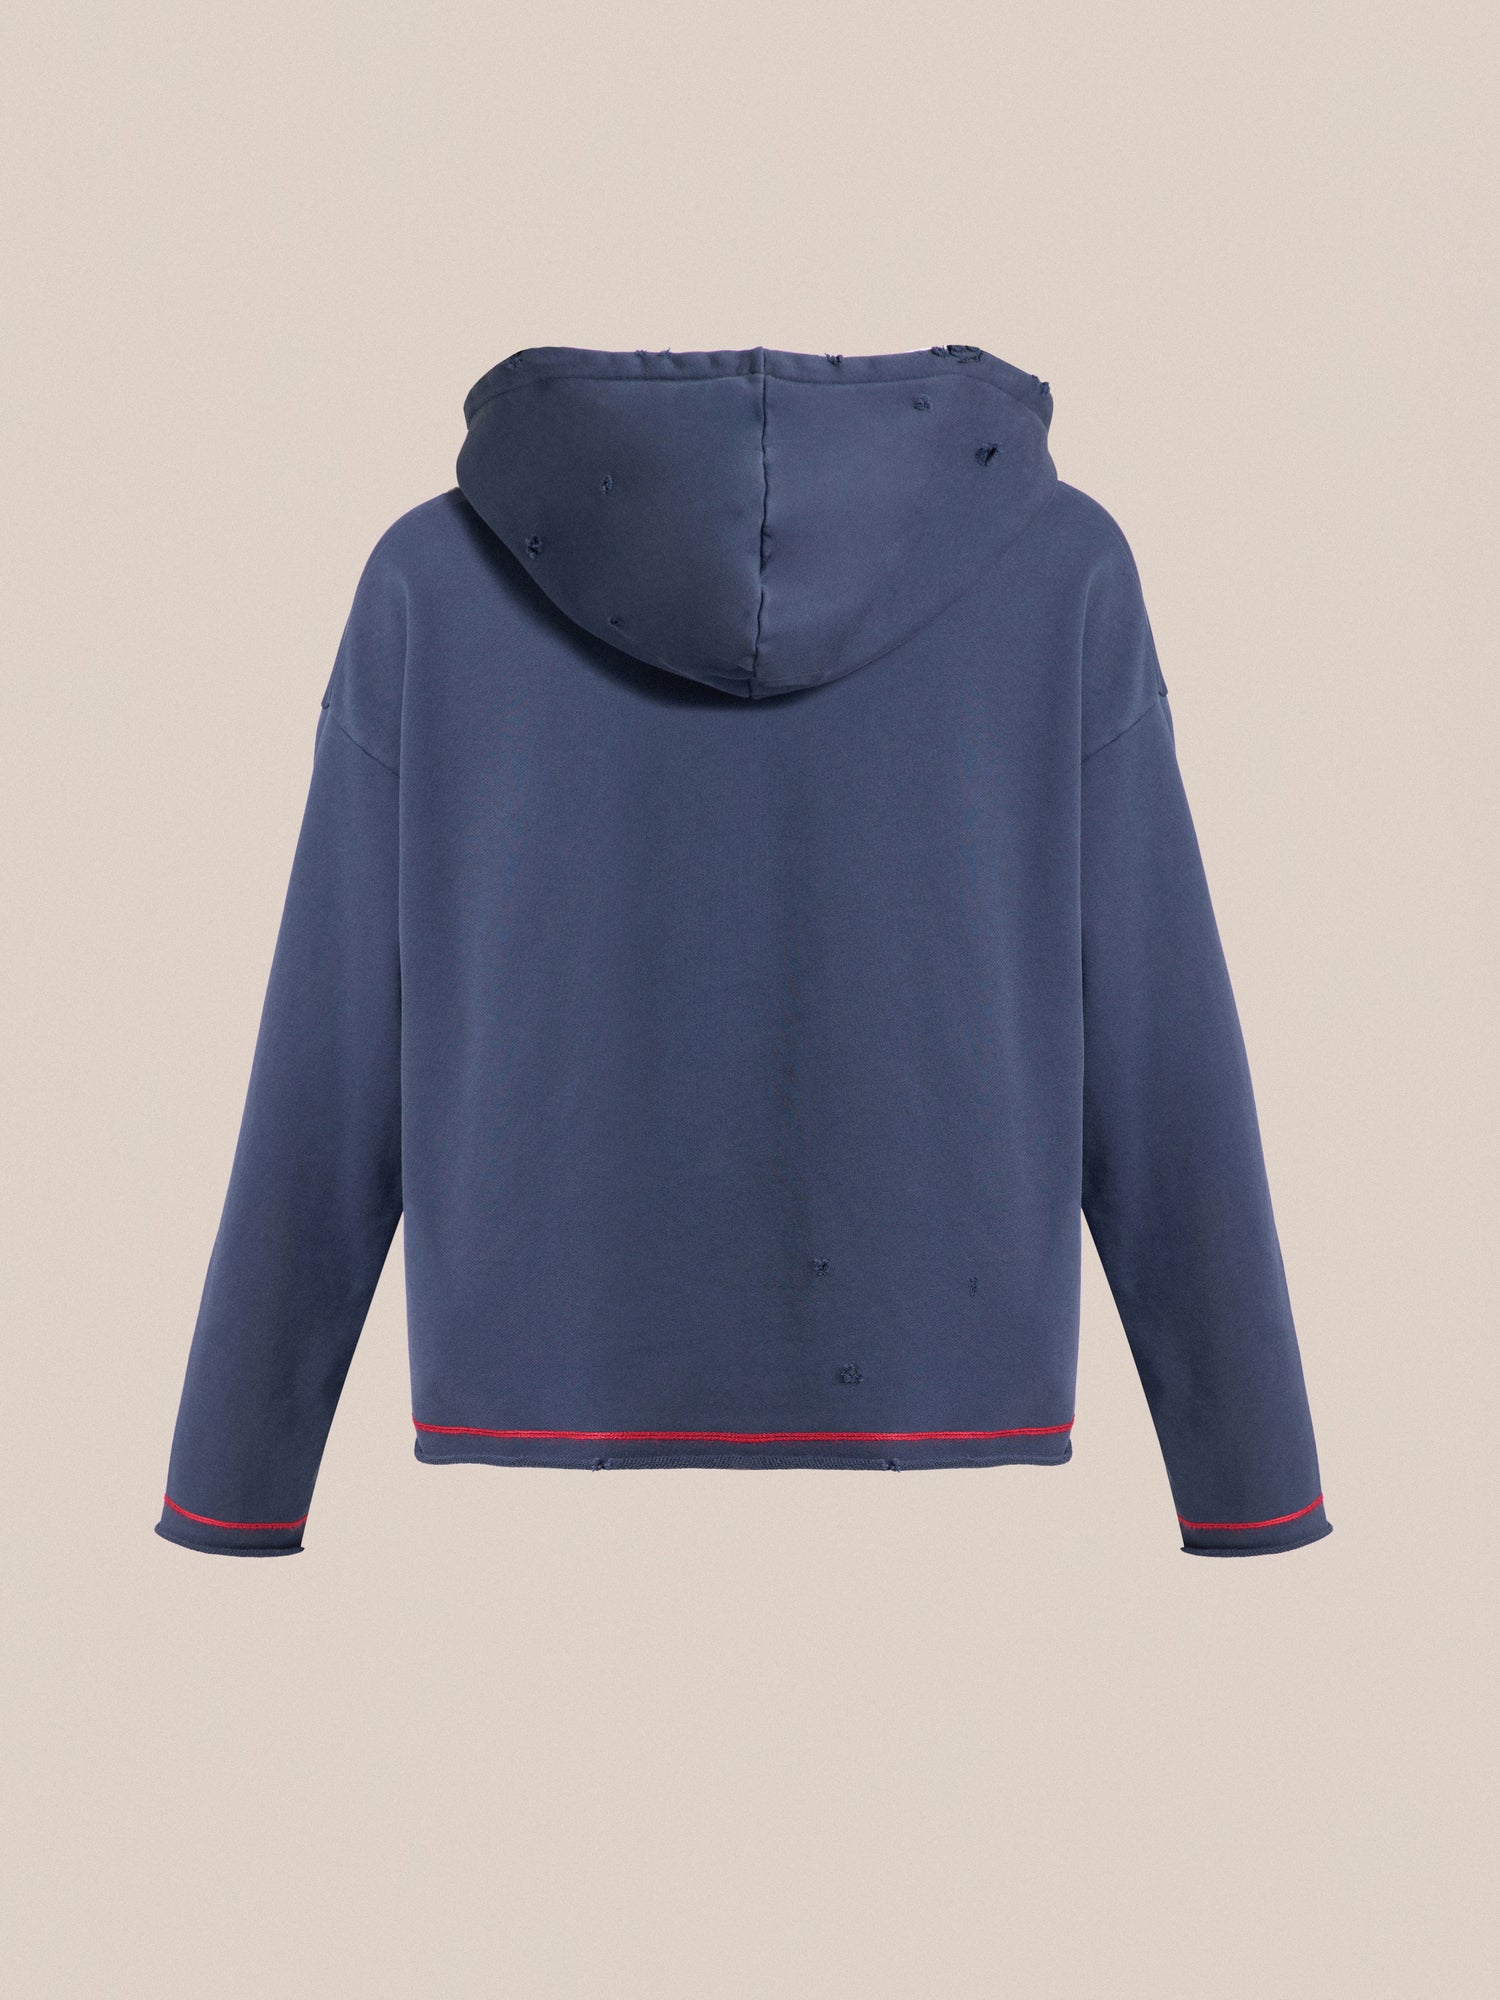 A blue hooded sweatshirt with red piping featuring Found's Indus Embroidered Hoodie.